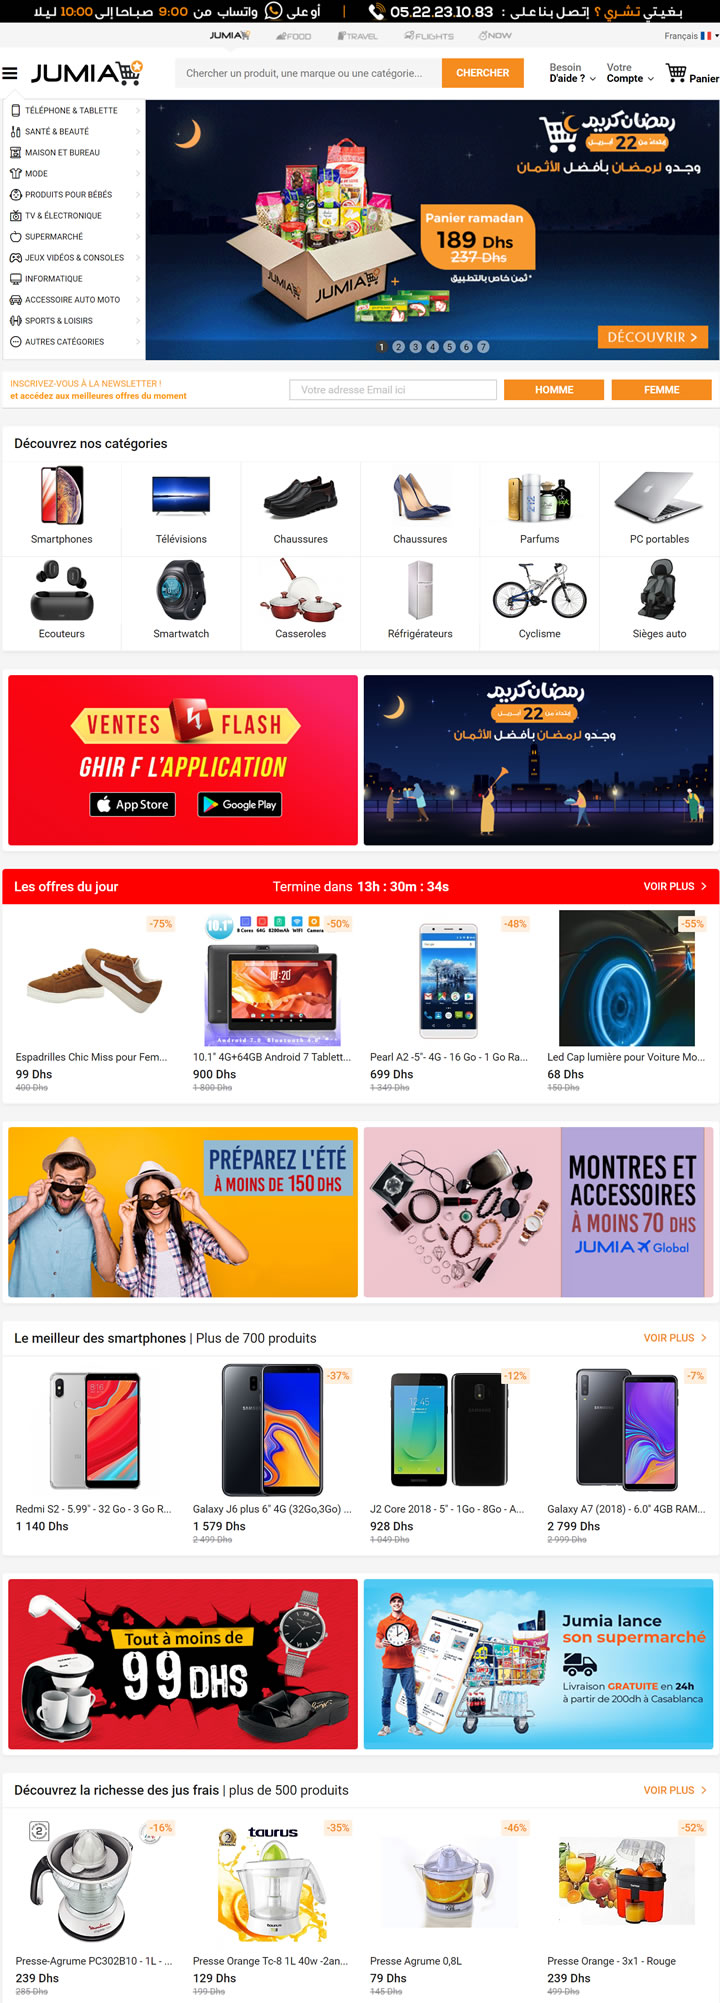 Morocco’s Number One Online Store: Jumia Morocco